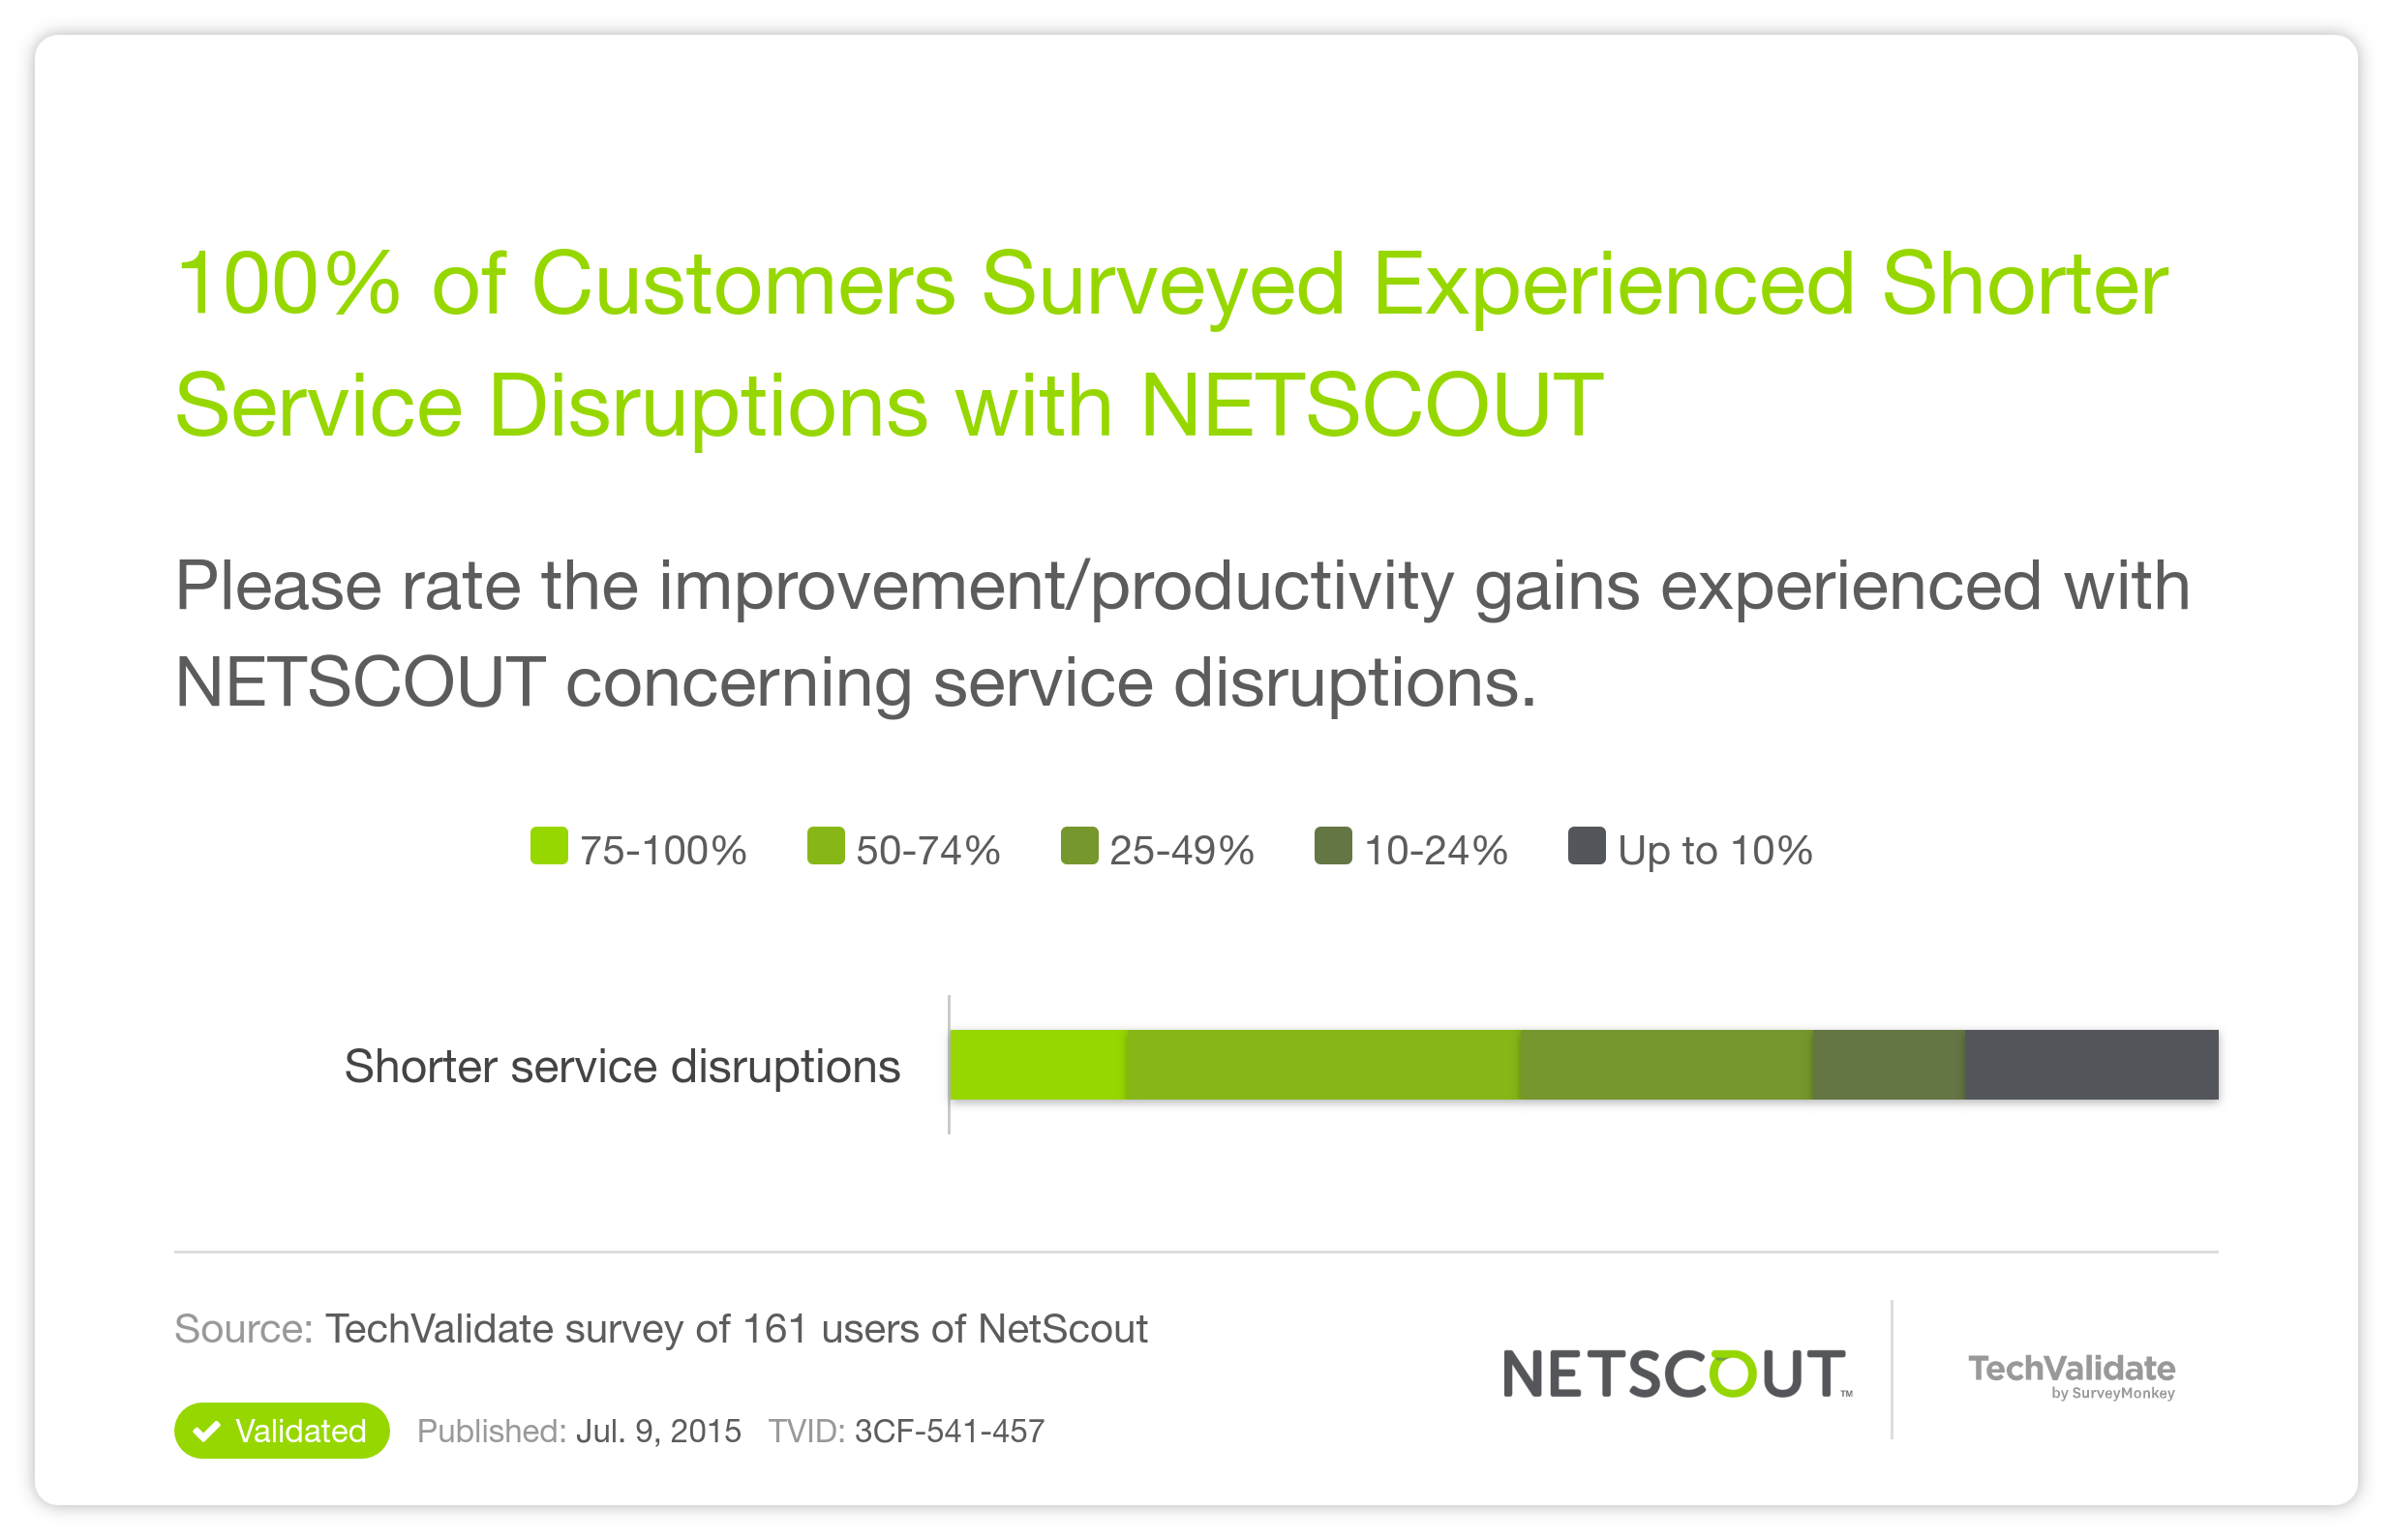 100% of Customers Surveyed Experienced Shorter Service Disruptions with NETSCOUT